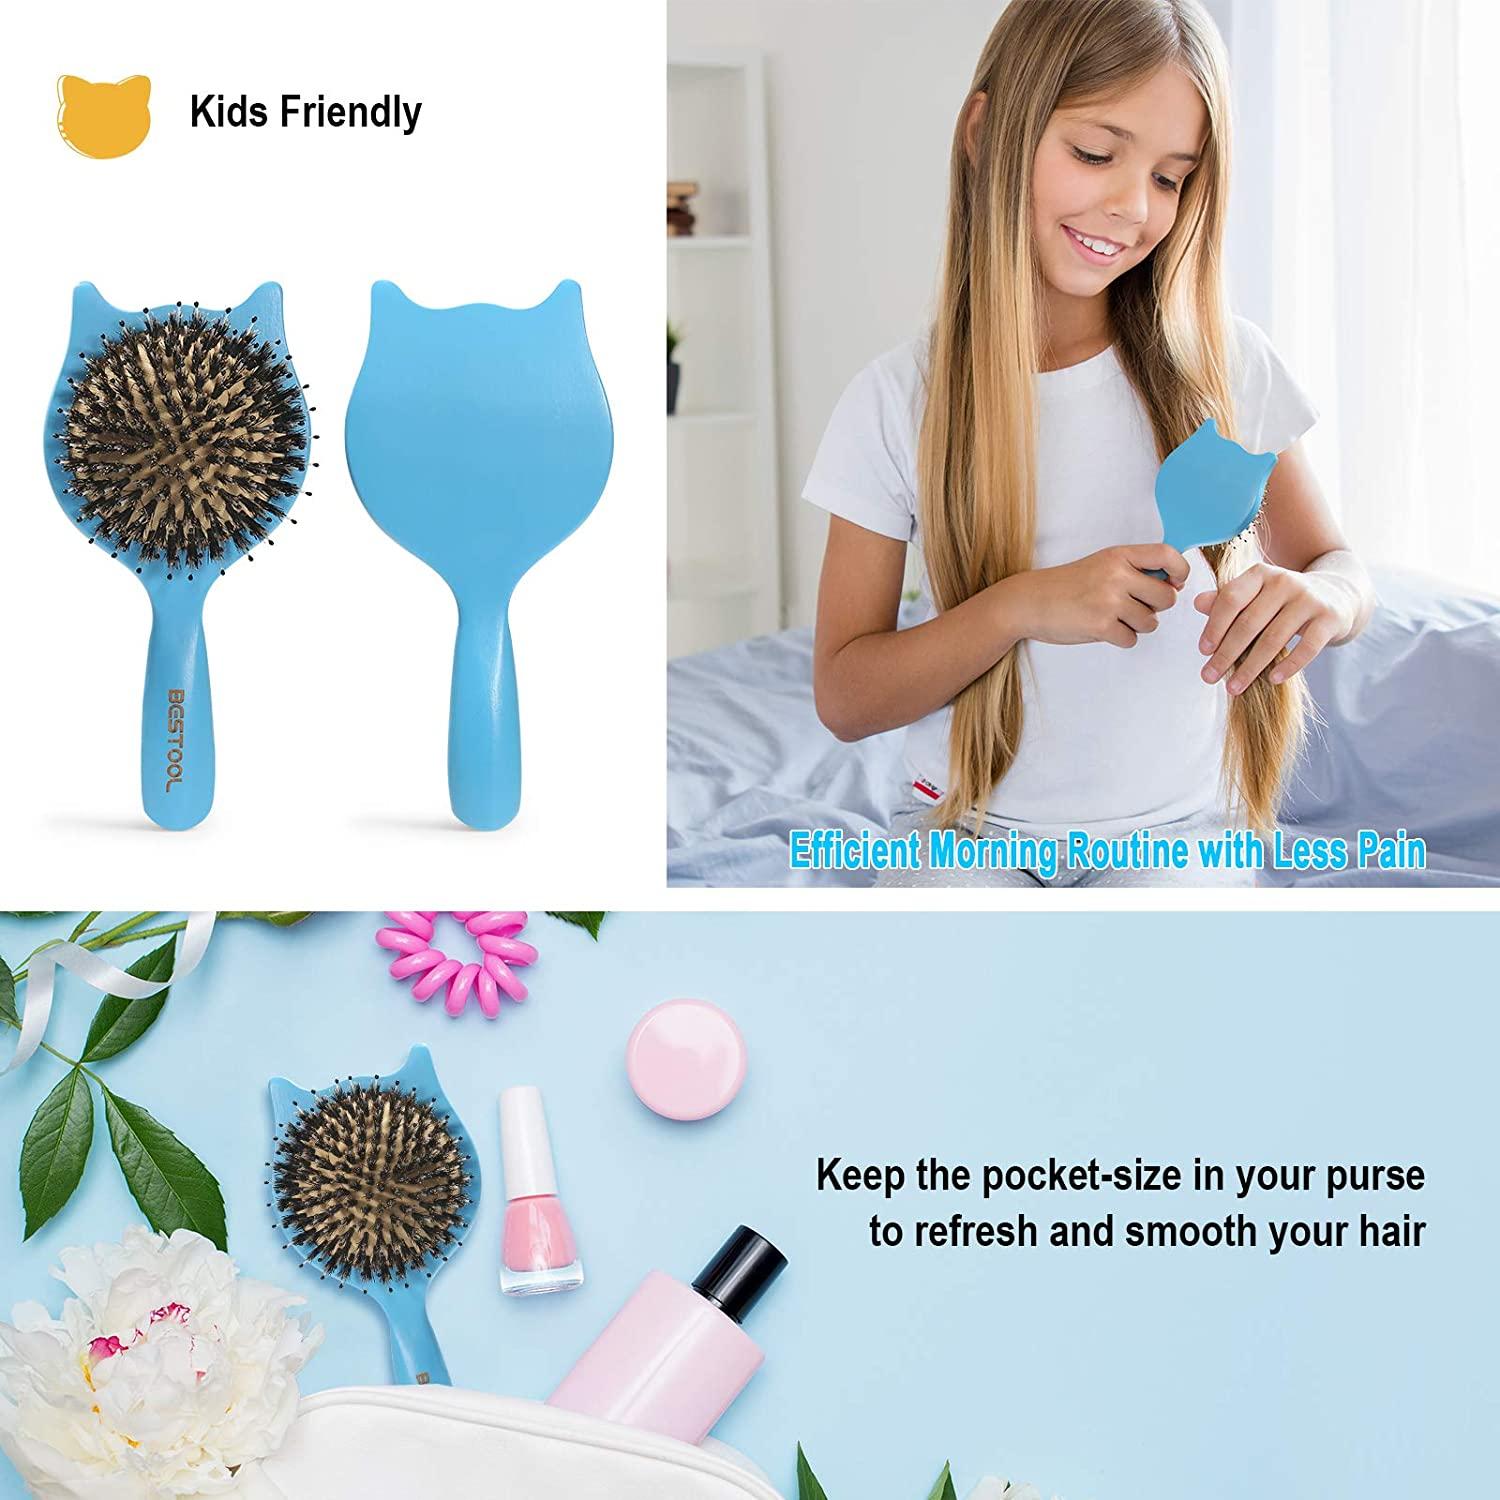 Buy AKADO Travel Hair Brush with Mirror, Compact Mirror with Mini Hair Brush  Kit, Folding Hairbrush for Women, Small Hair Comb with Mirror Portable Size  in Purse or Pocket, 1pc, Multi Color.